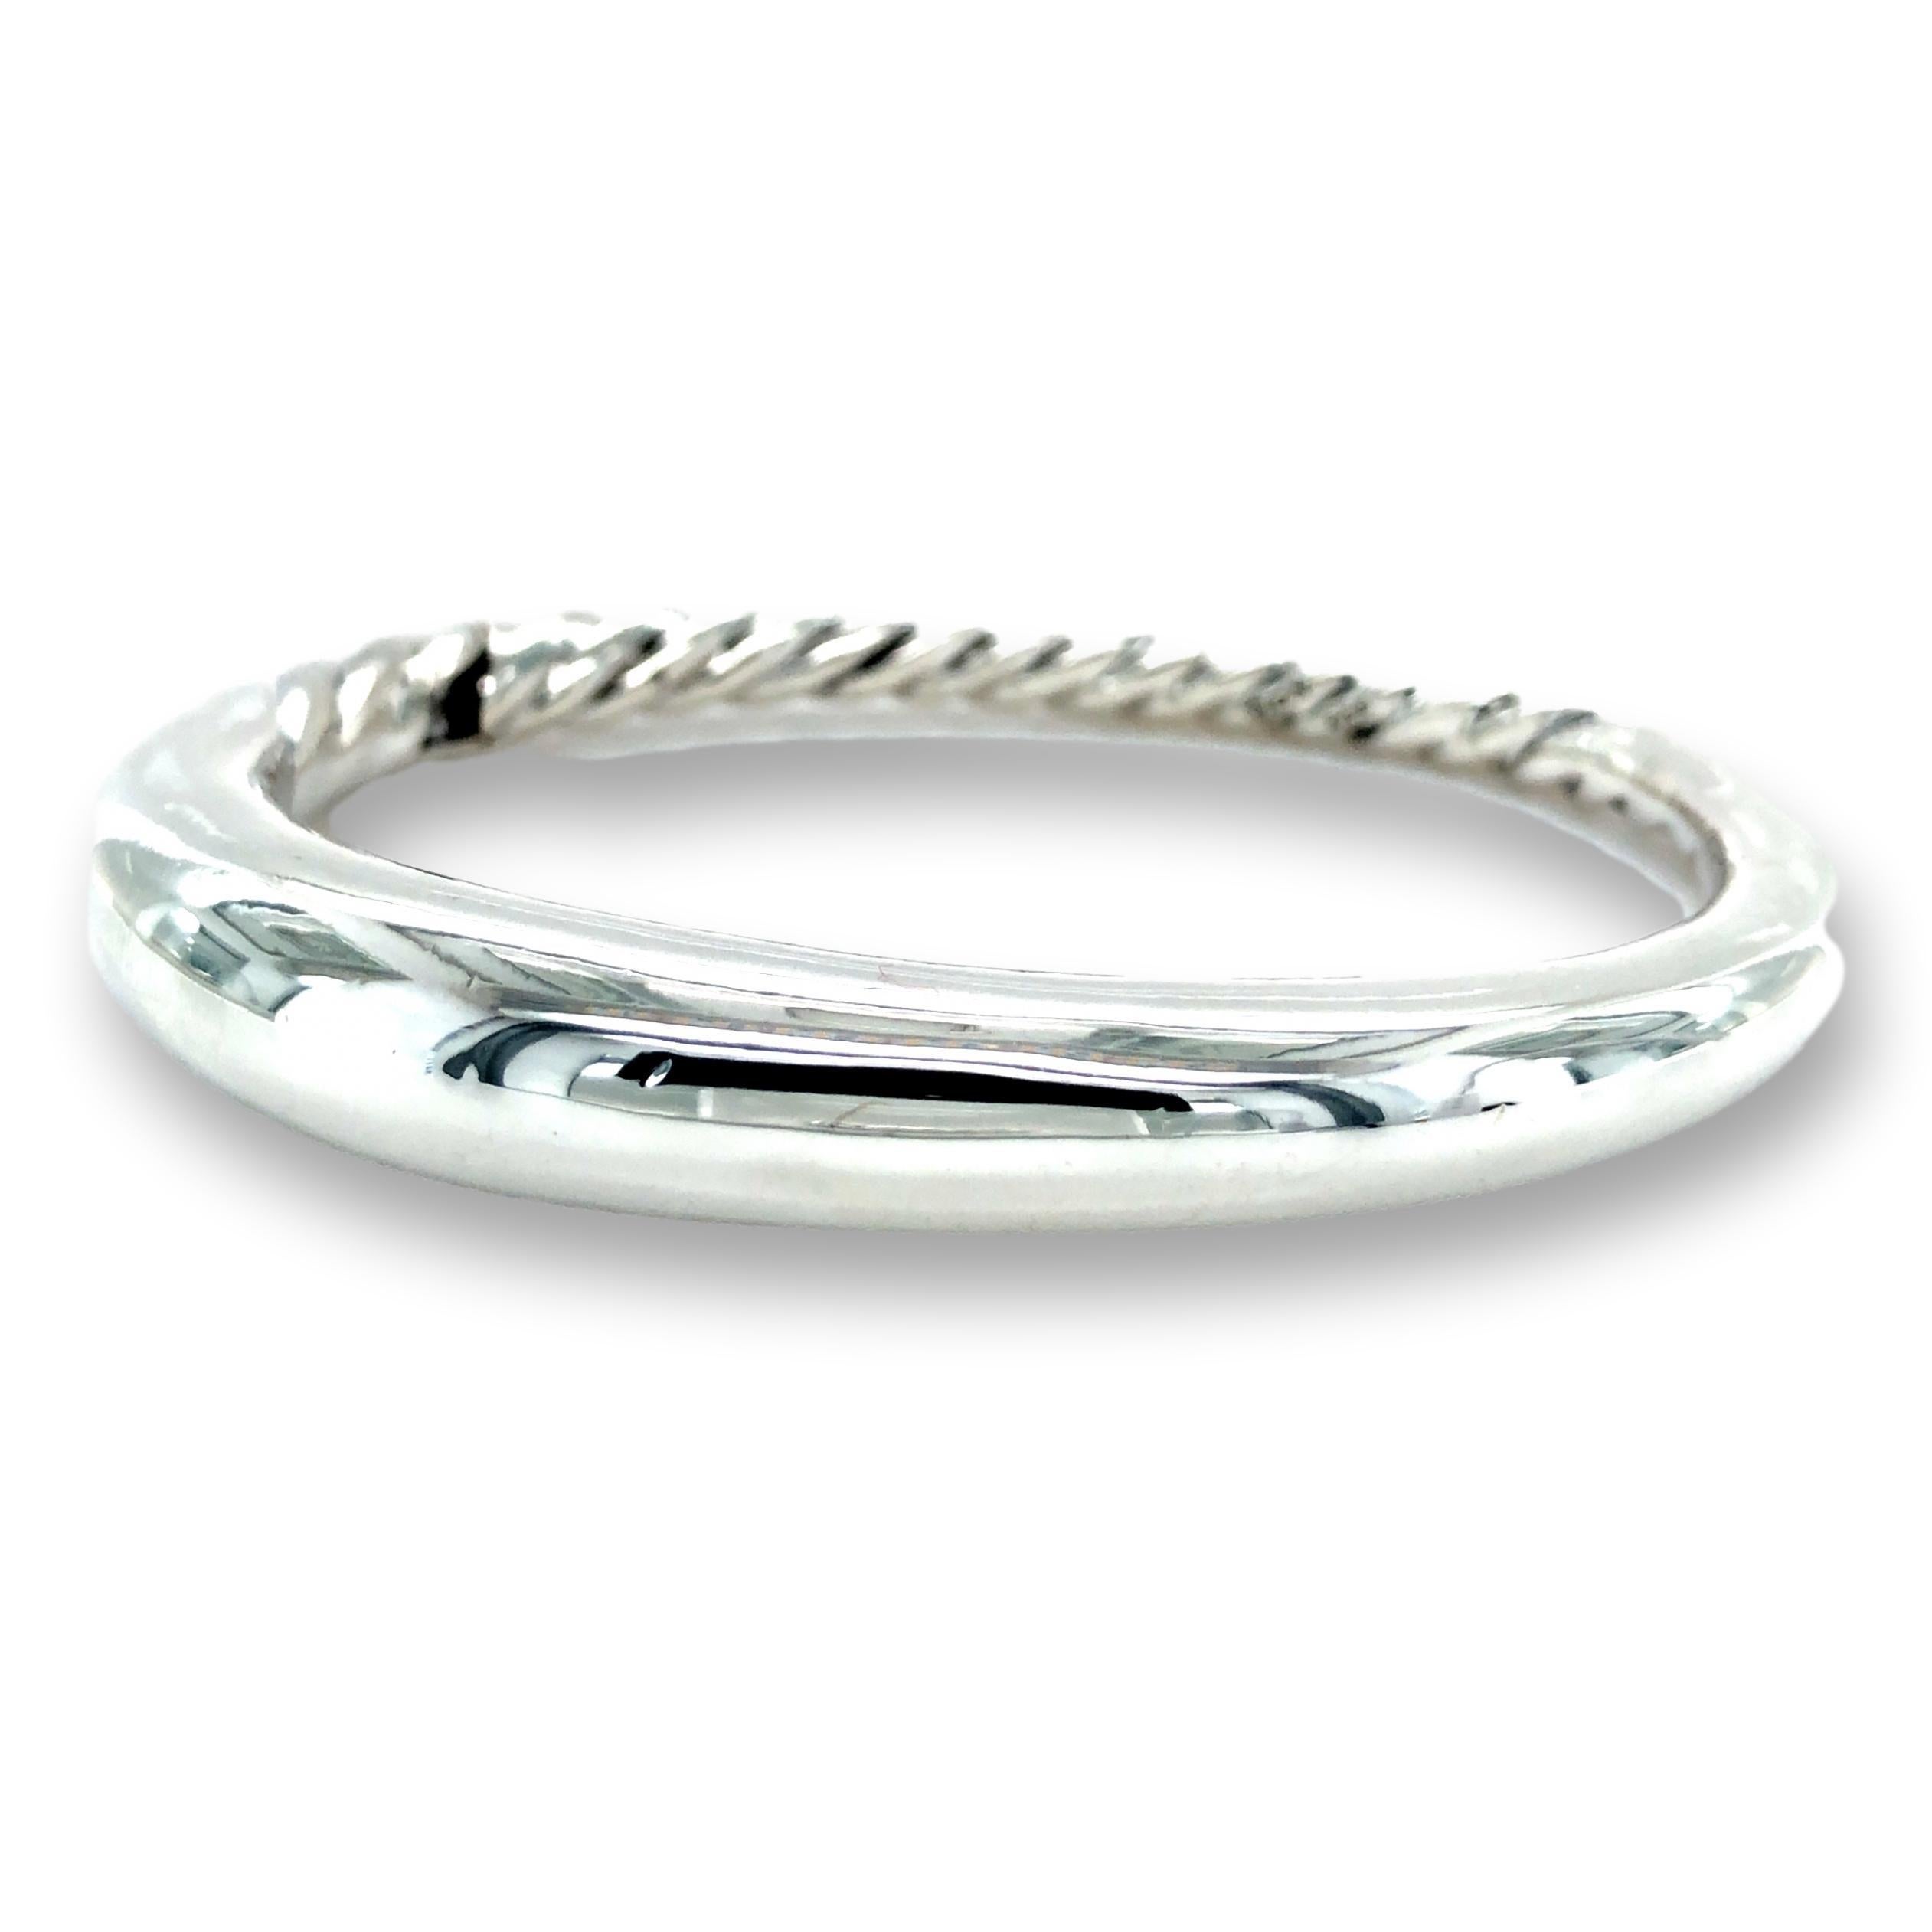 David Yurman pure form bangle bracelet finely crafted in sterling silver with a smooth front and cable twist back design 17mm at the front and 6 mm towards the back. The bracelet has a snap hinge closure. Bracelet Specifications

BRACELET